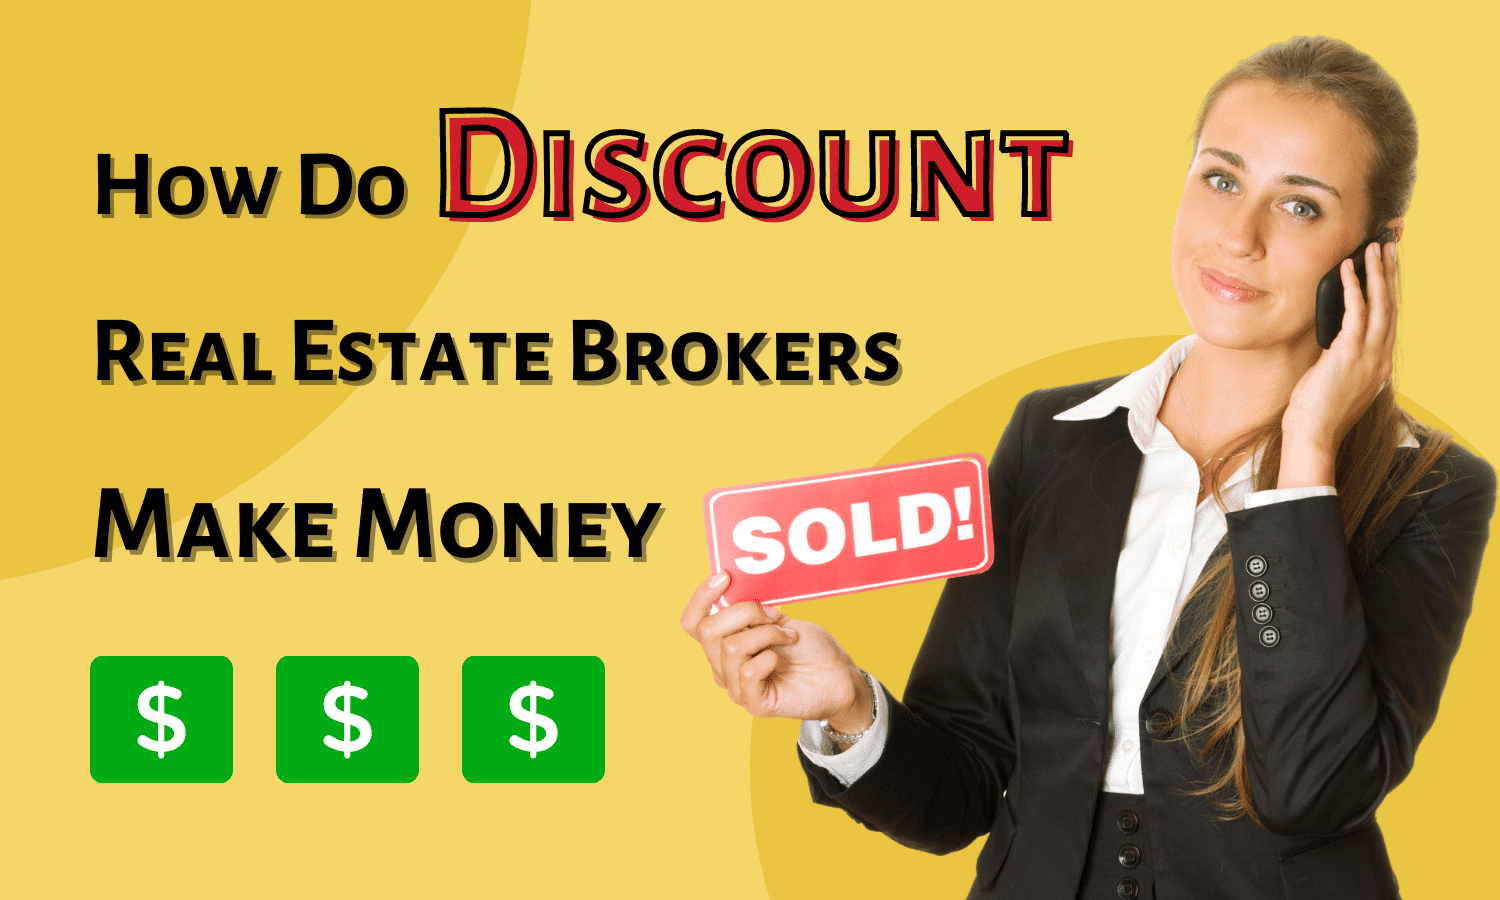 How Do Discount Real Estate Brokers Make Money